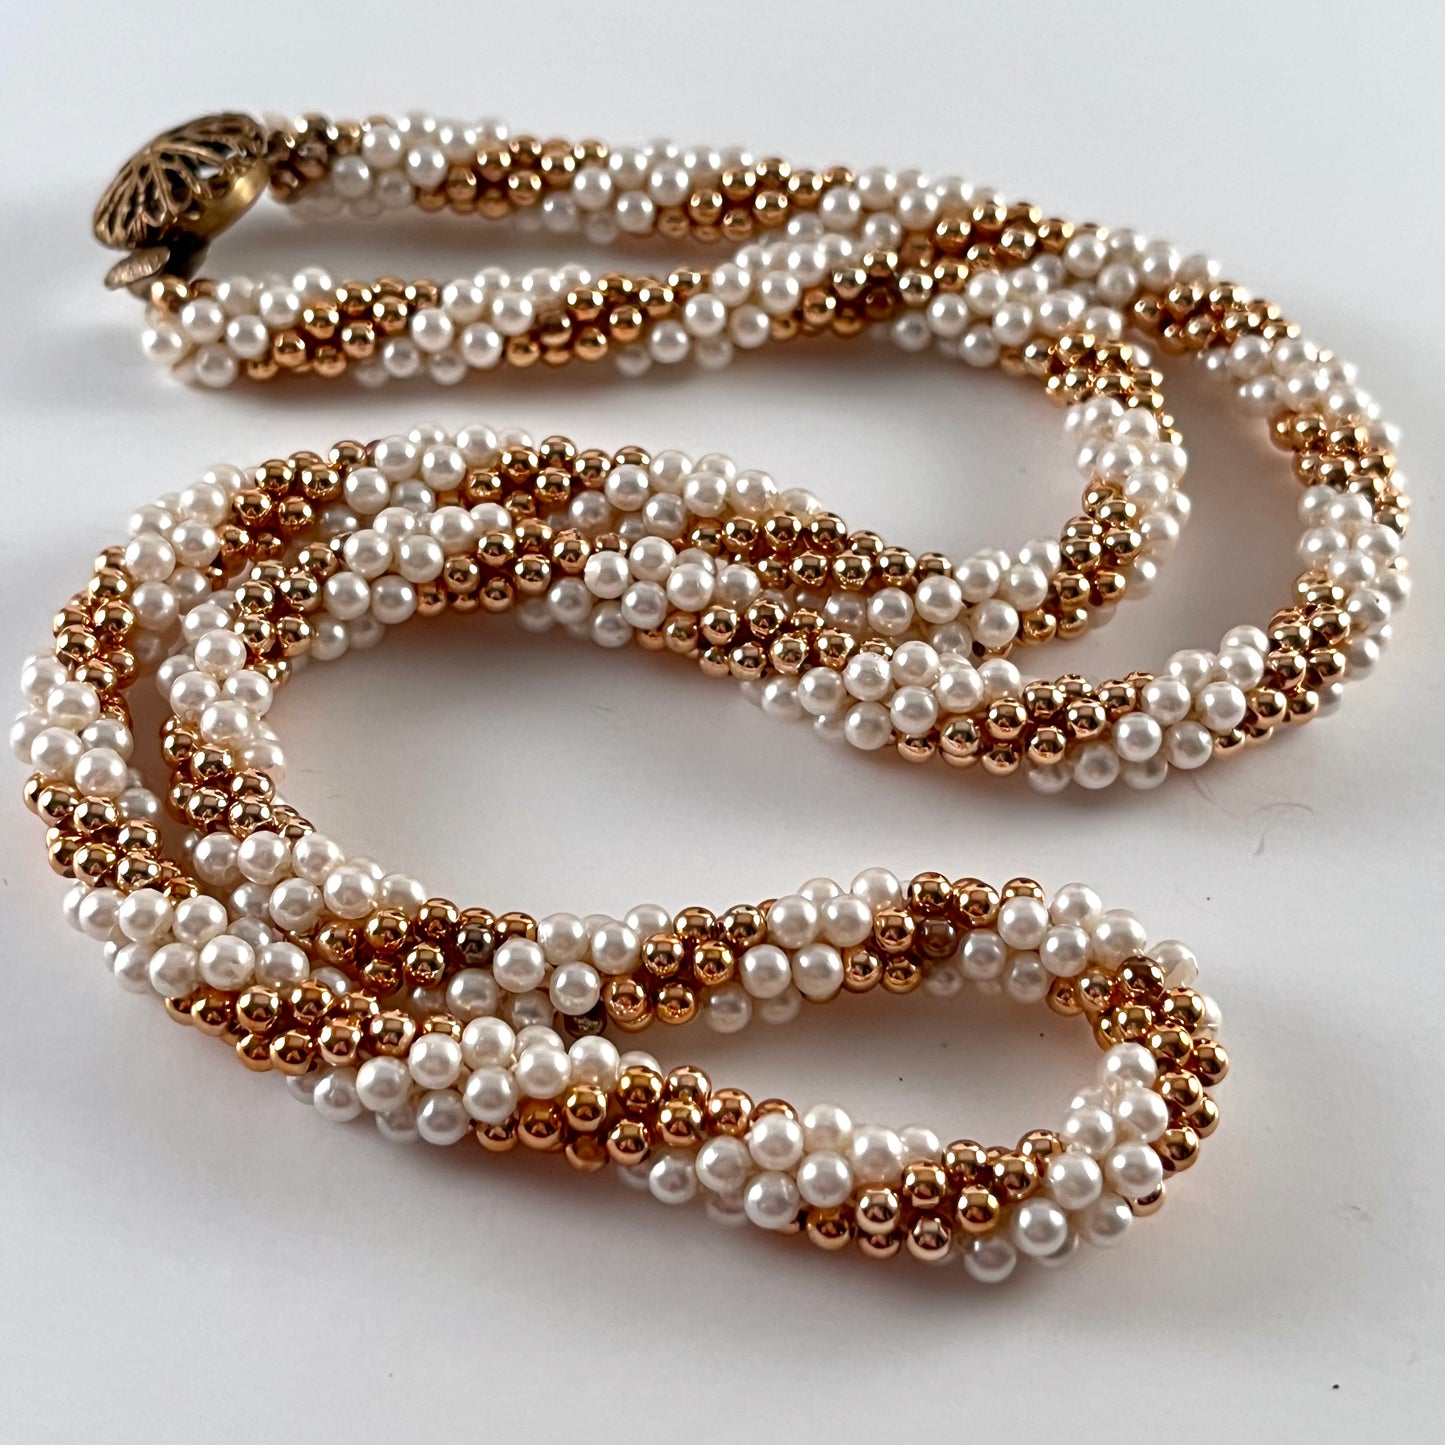 1960s Woven Bead Rope Necklace